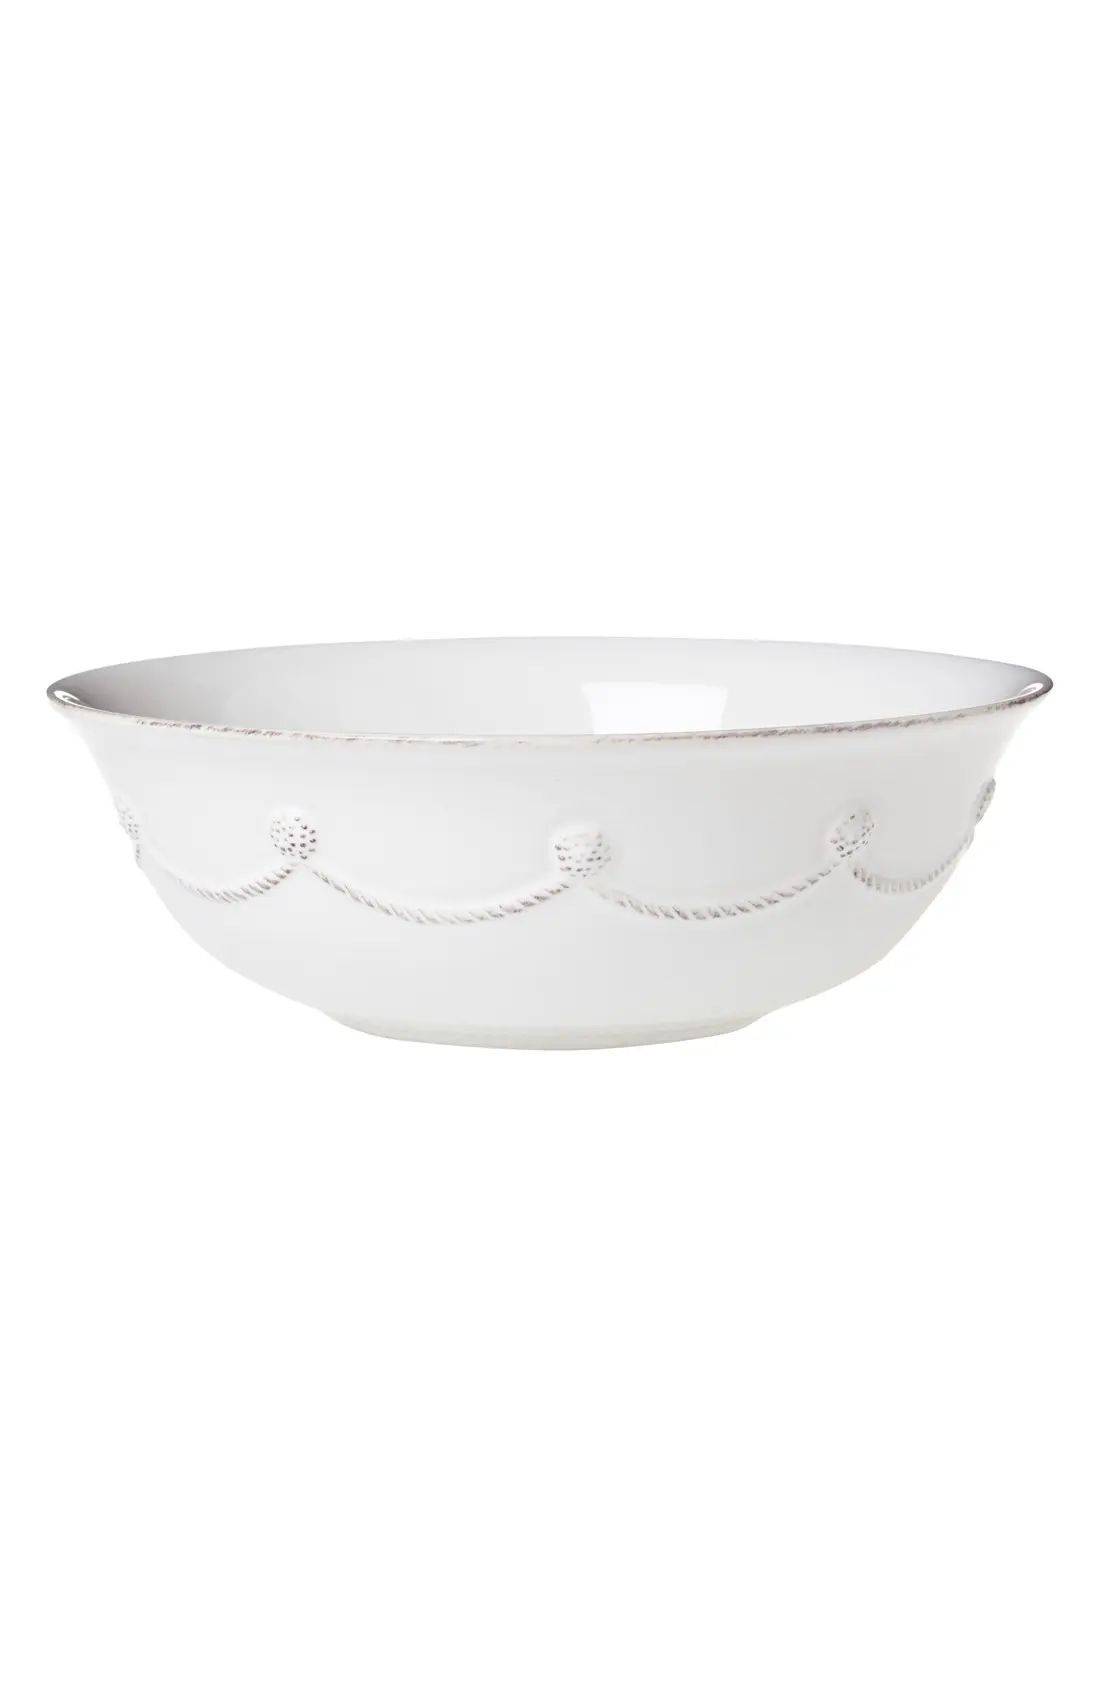 Juliska 'Berry And Thread' Ceramic Serving Bowl, Size One Size - White | Nordstrom